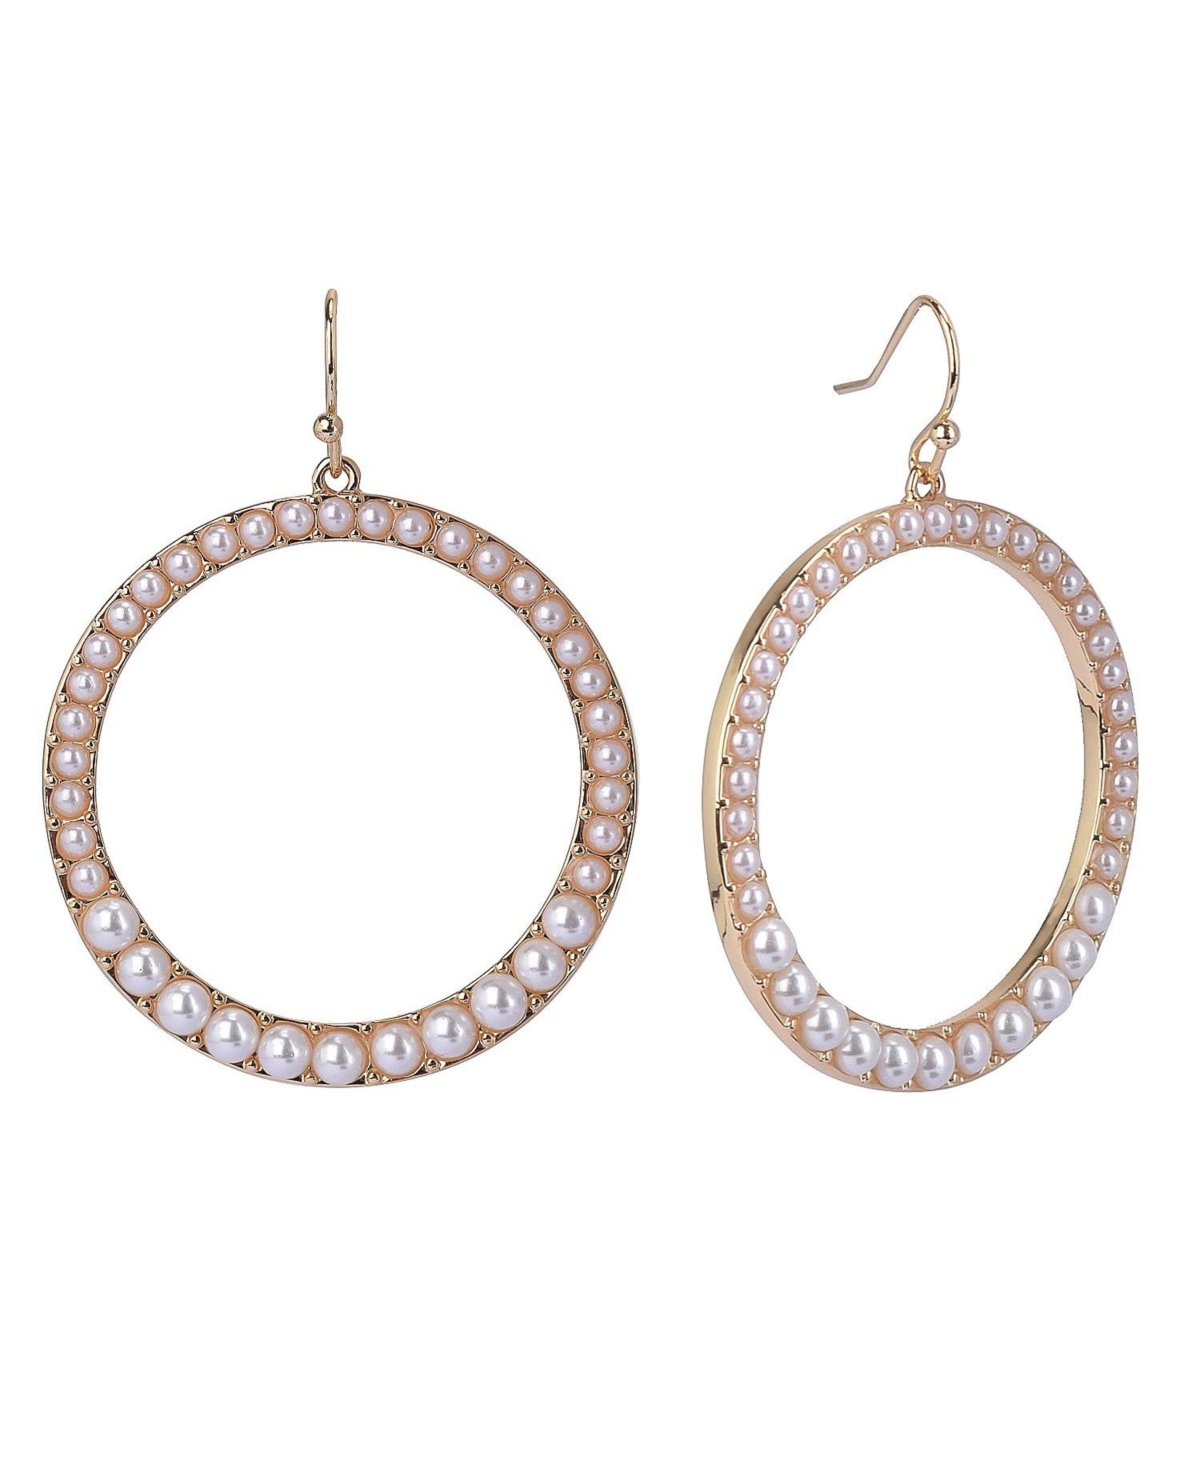 Ring Drop Earrings with Pearl Accents - White